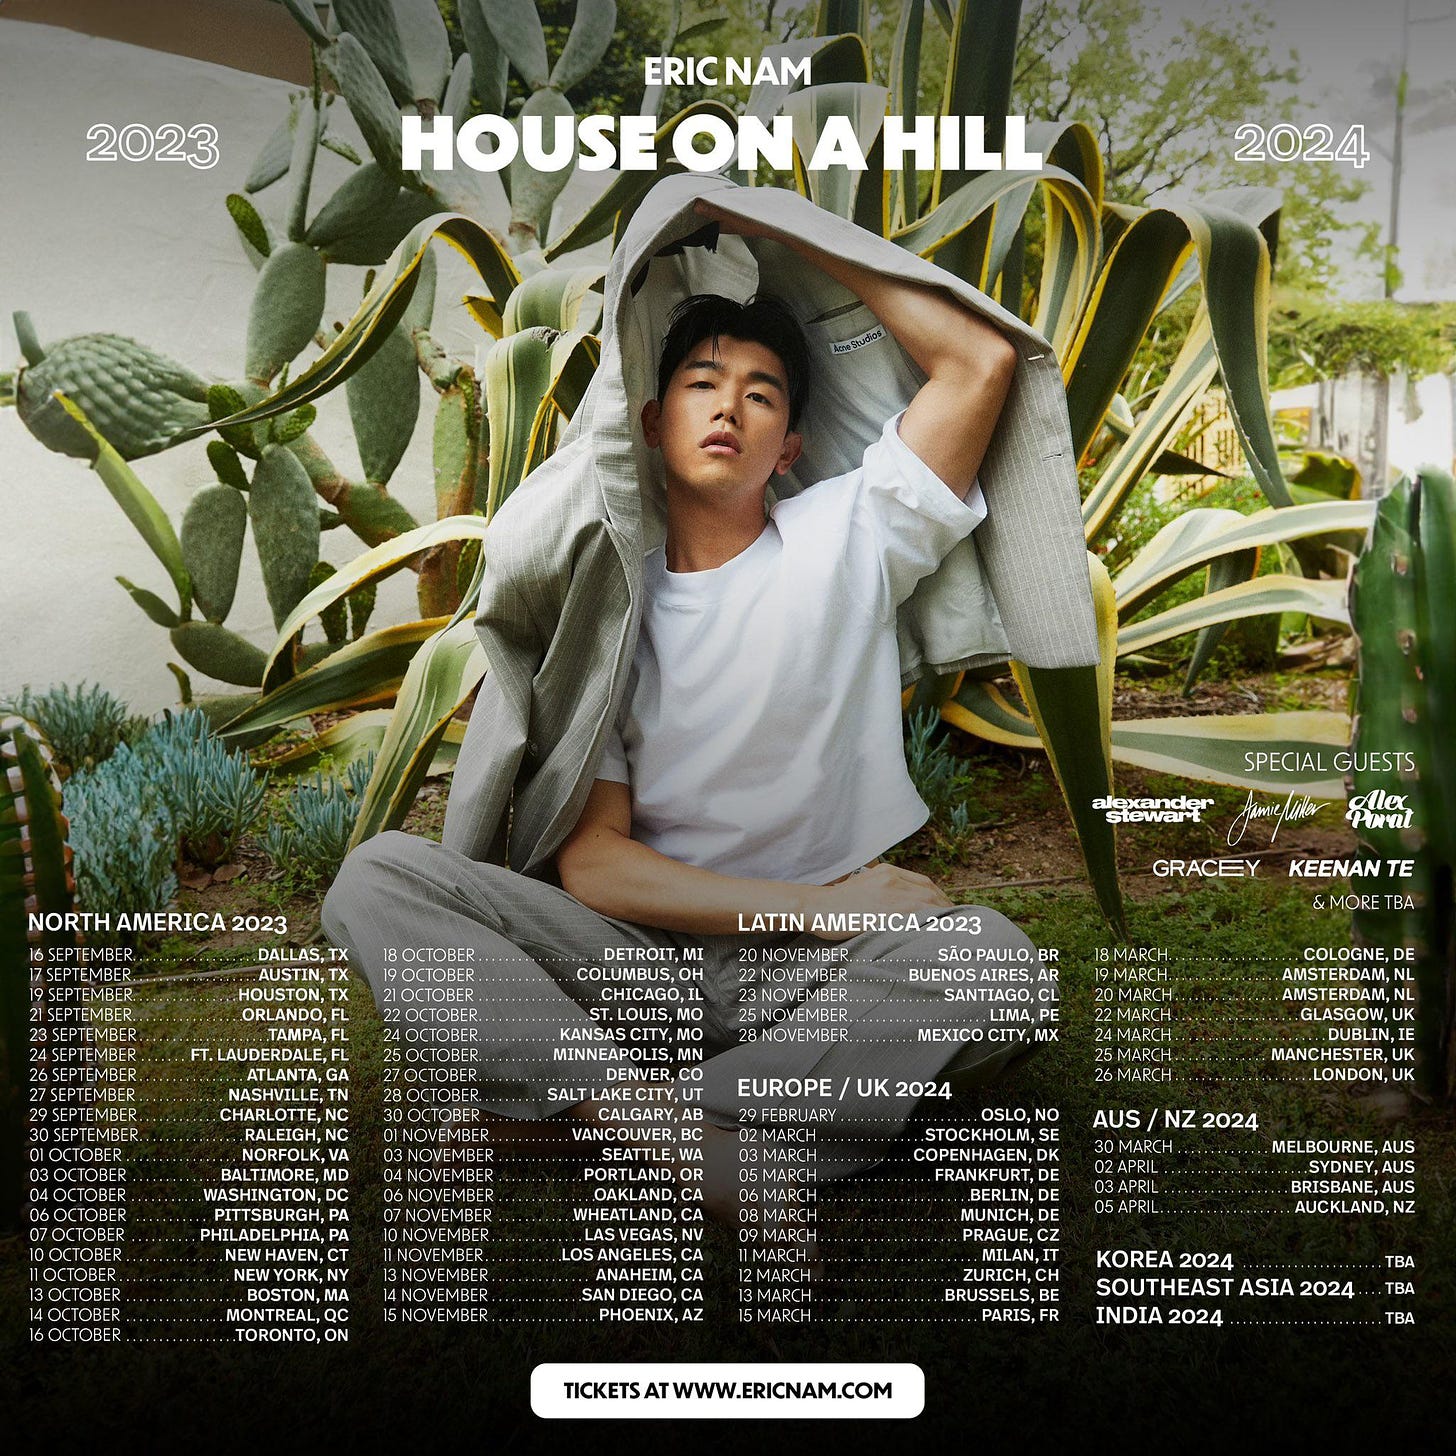 Eric Nam House On A Hill Official Tour Dates and Venue Announcement  2023-2024 : r/kpop